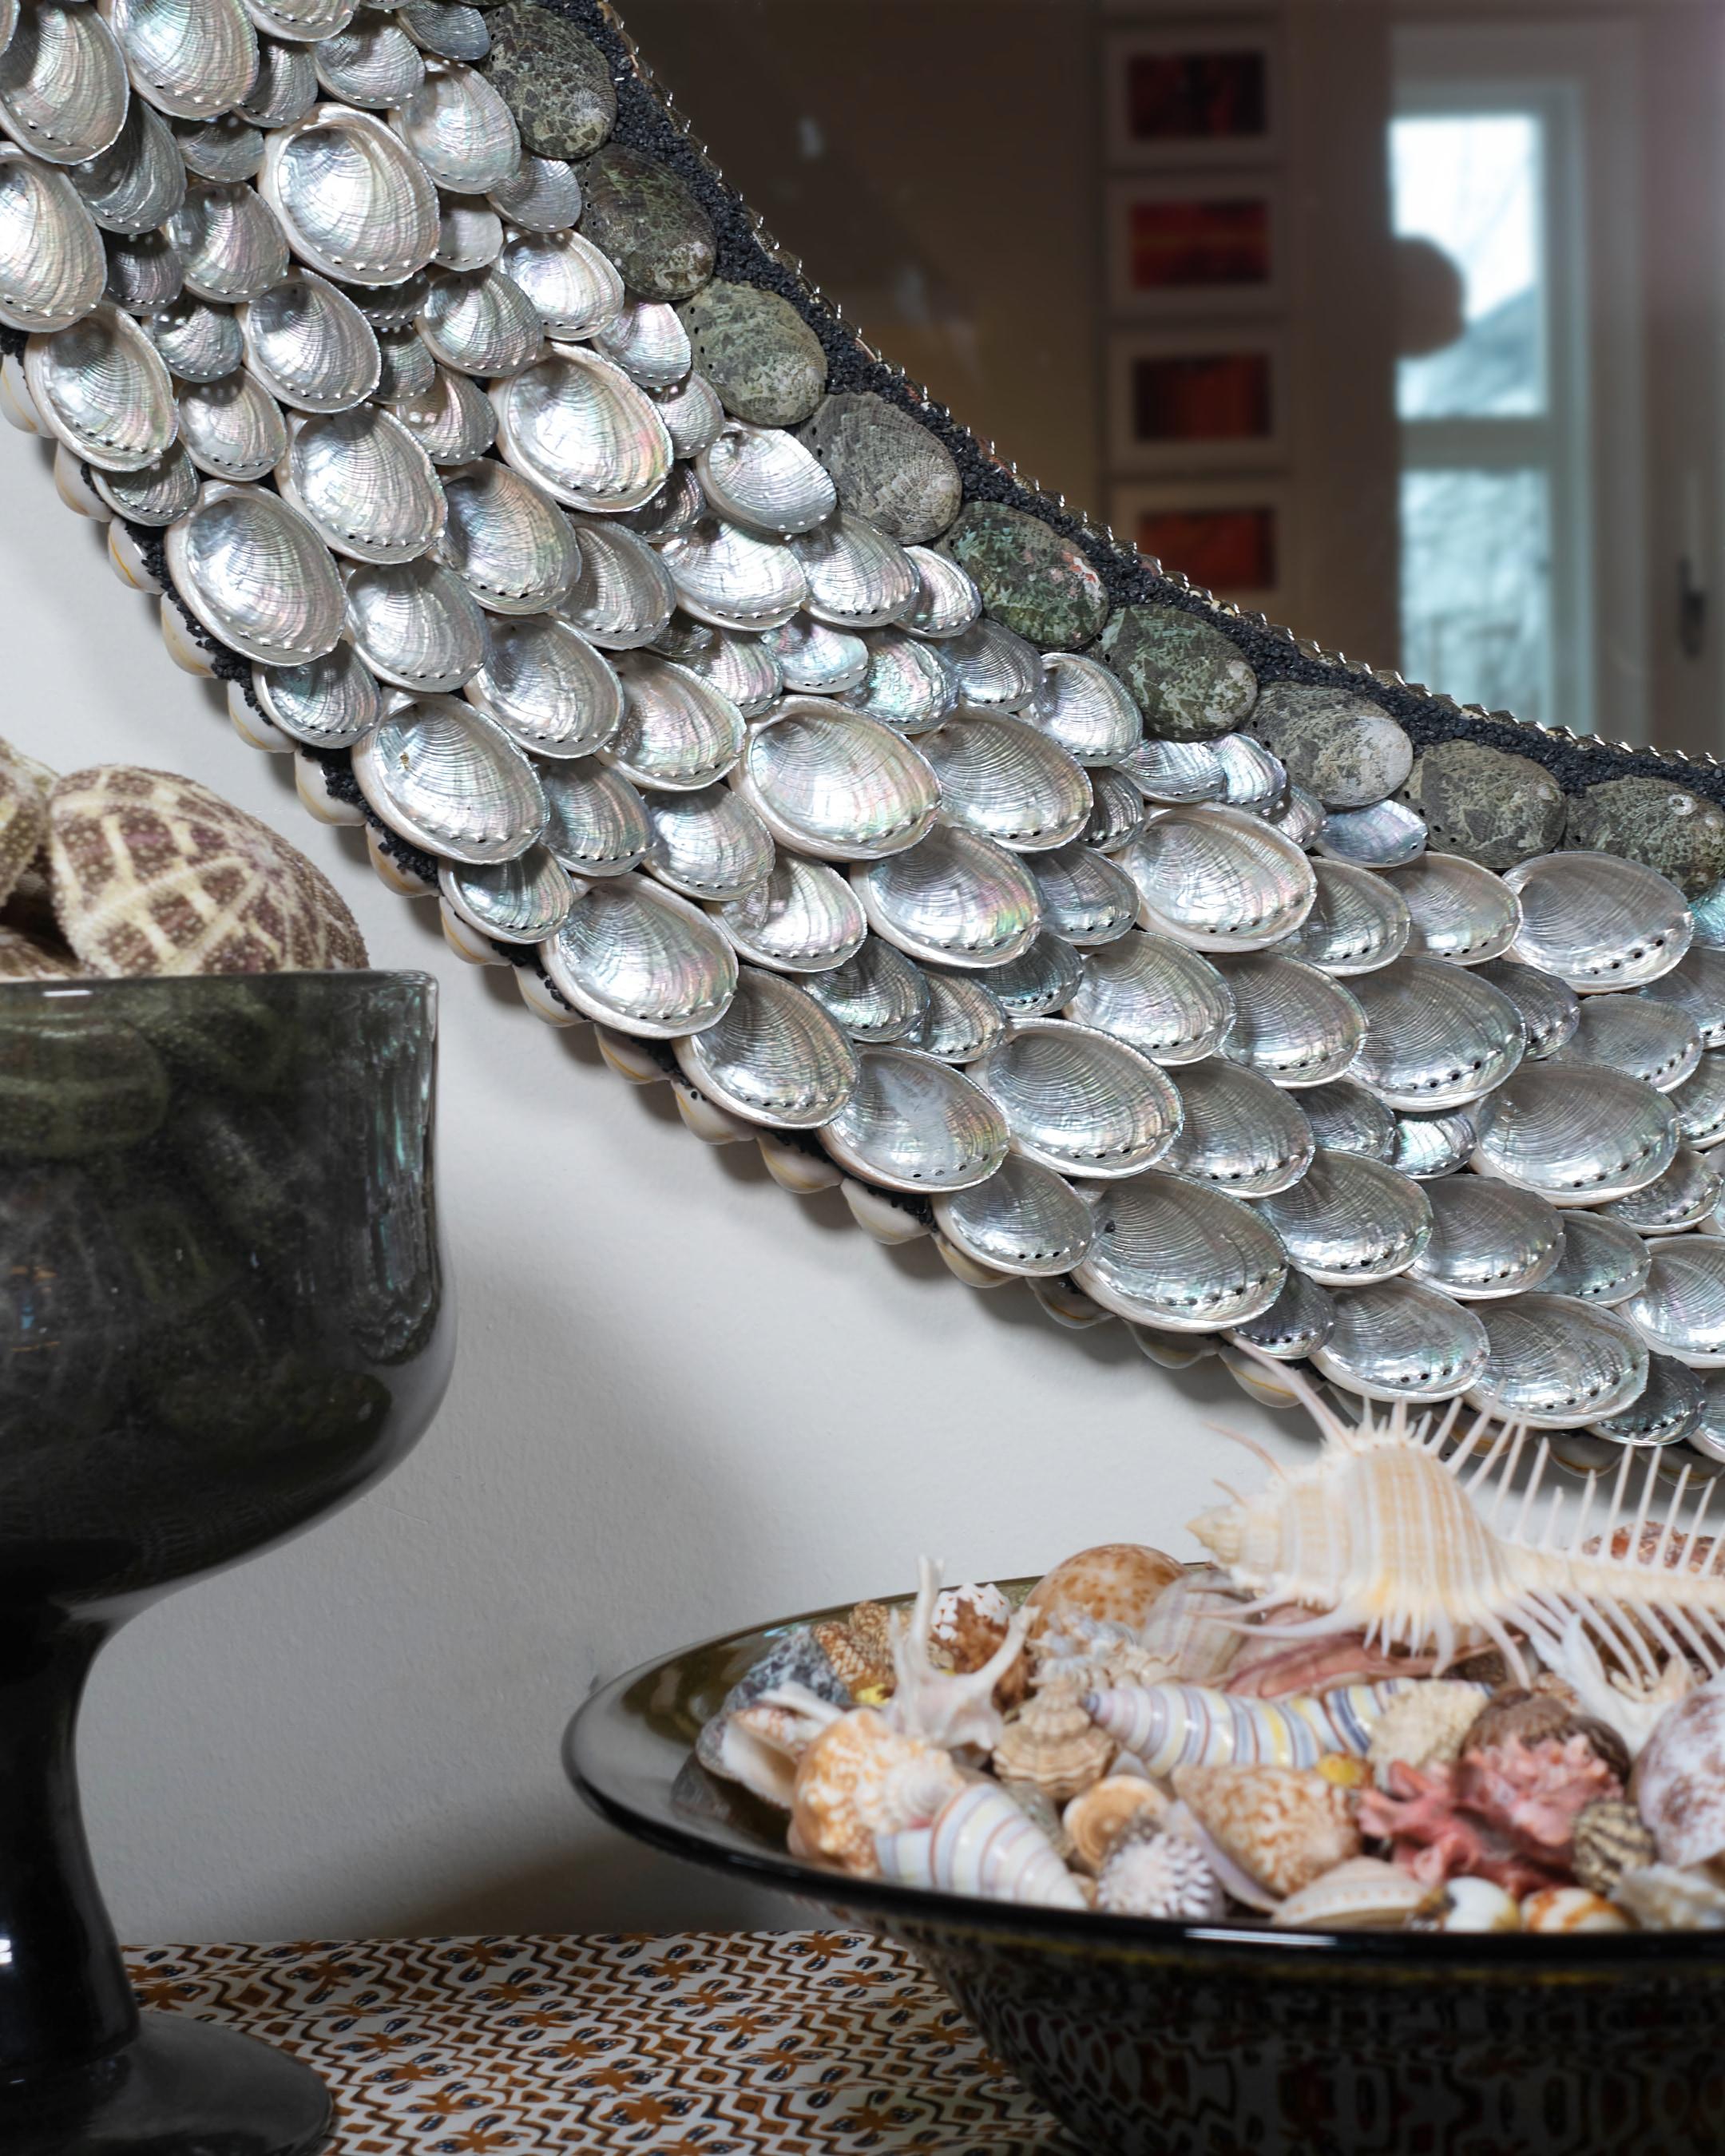 This is an elegant, shiny shell mirror (ø 102 cm) with a frame that continuously reflects the different lights in a day. “Ballroom Blitzz” is a first in a series of round mirrors where the two Shellman artists take advantage of the pearly inside of